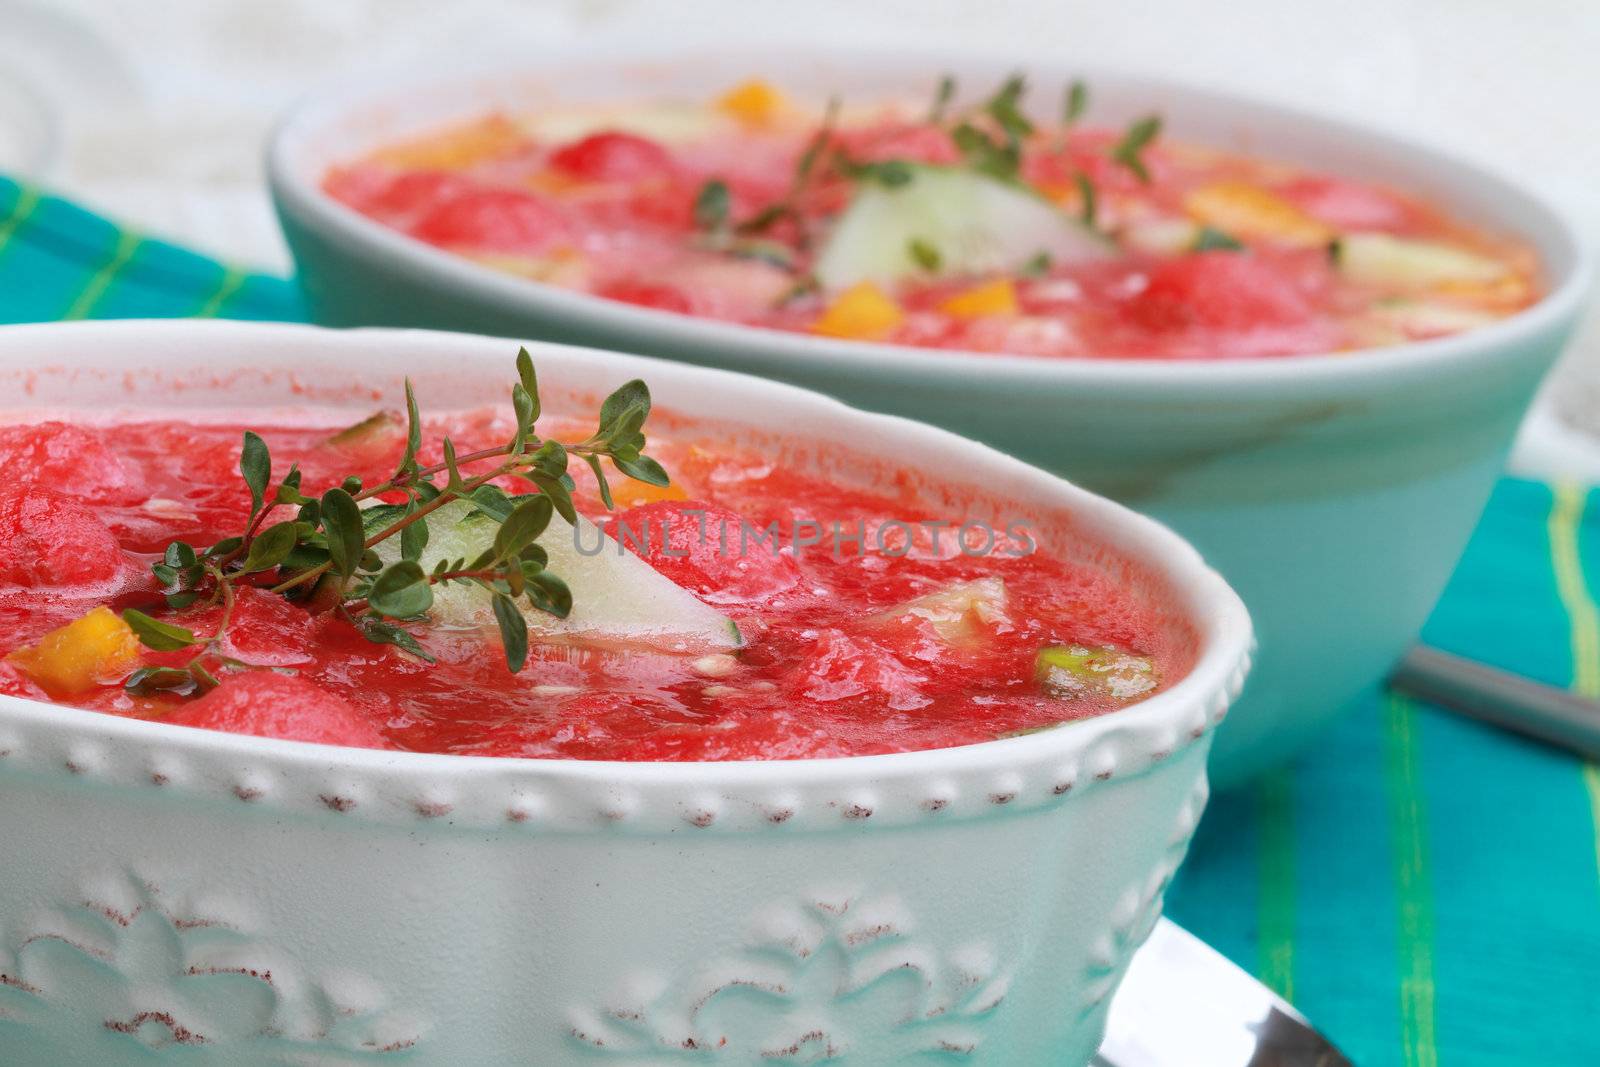 Watermelon Gazpacho made with watermelon, yellow peppers, cucumber, and garnished with a sprig of fresh thyme.